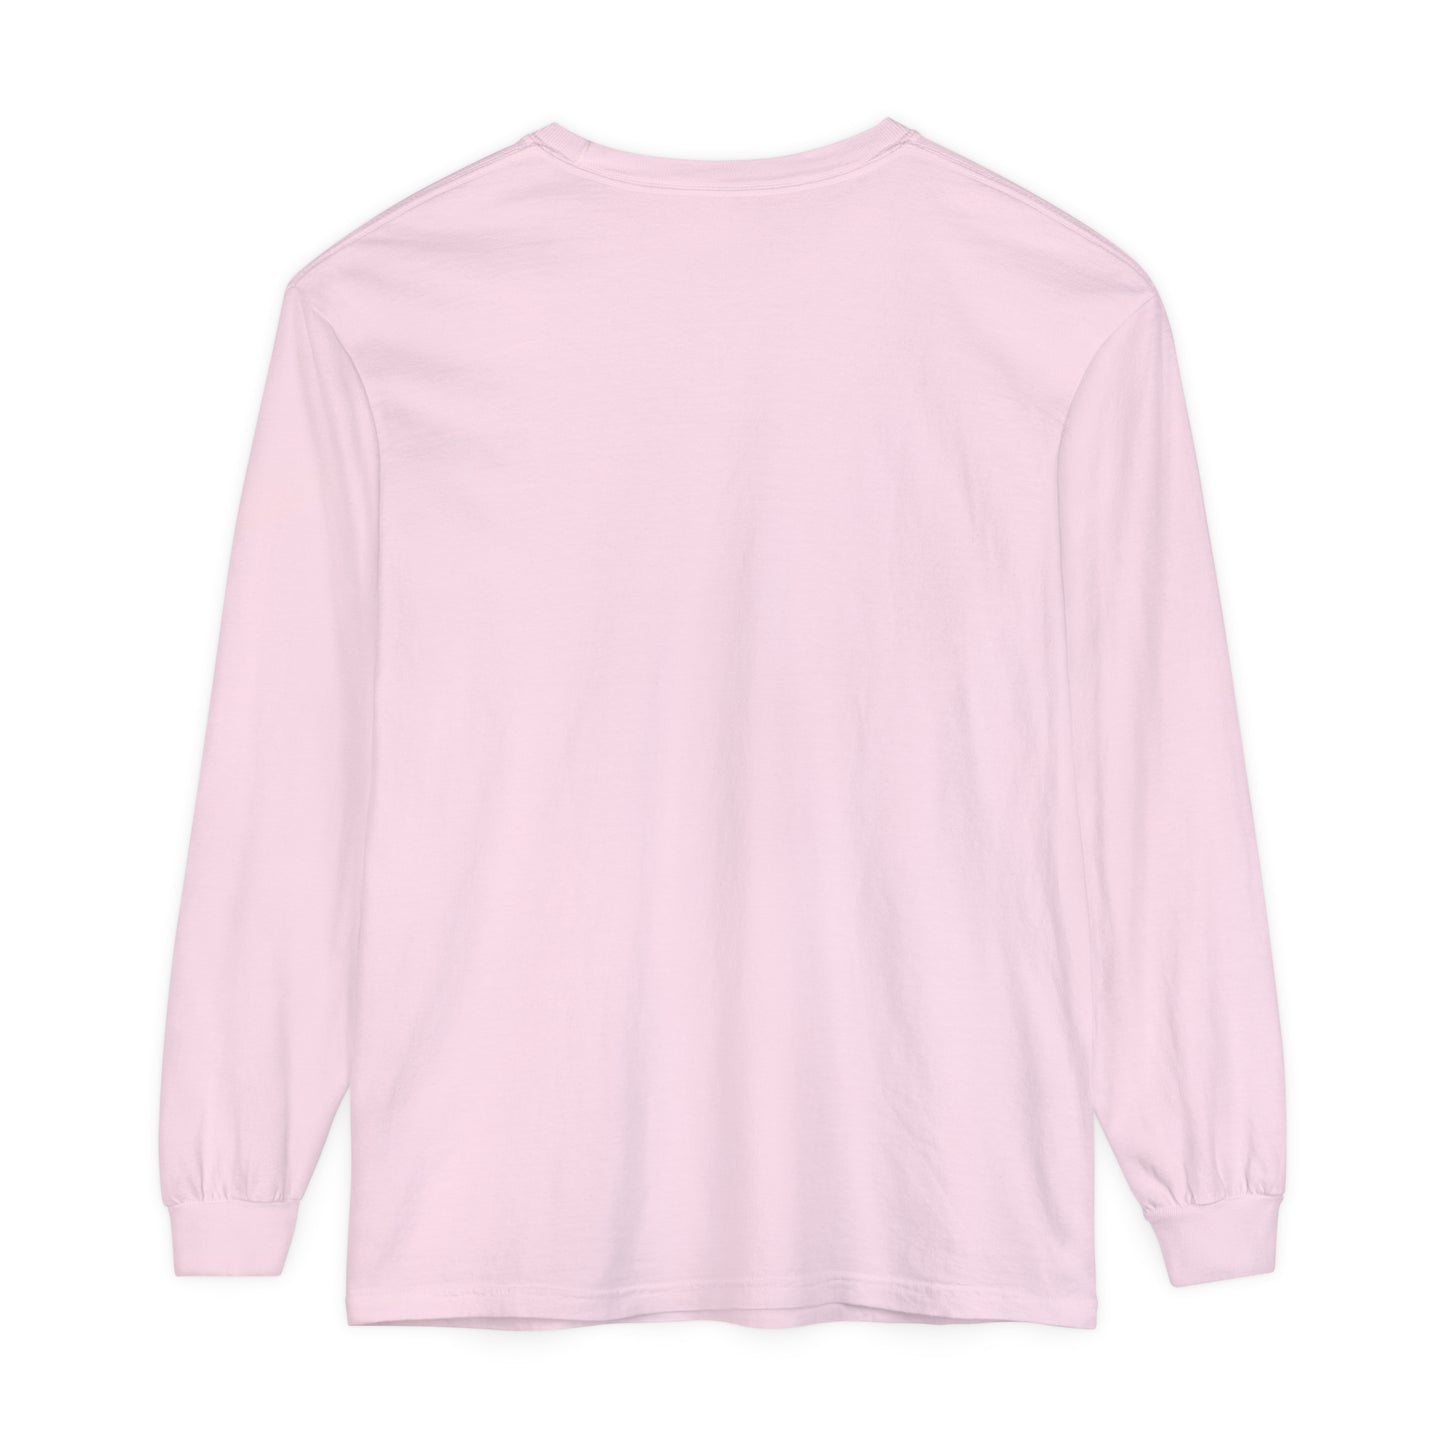 This pink long sleeve Tis the Season Christmas Tree Shirt by Printify is the perfect addition to your winter wardrobe. With its comfortable fit and stylish design, it's great for wearing during the holiday season as a Christmas T-Shirt.